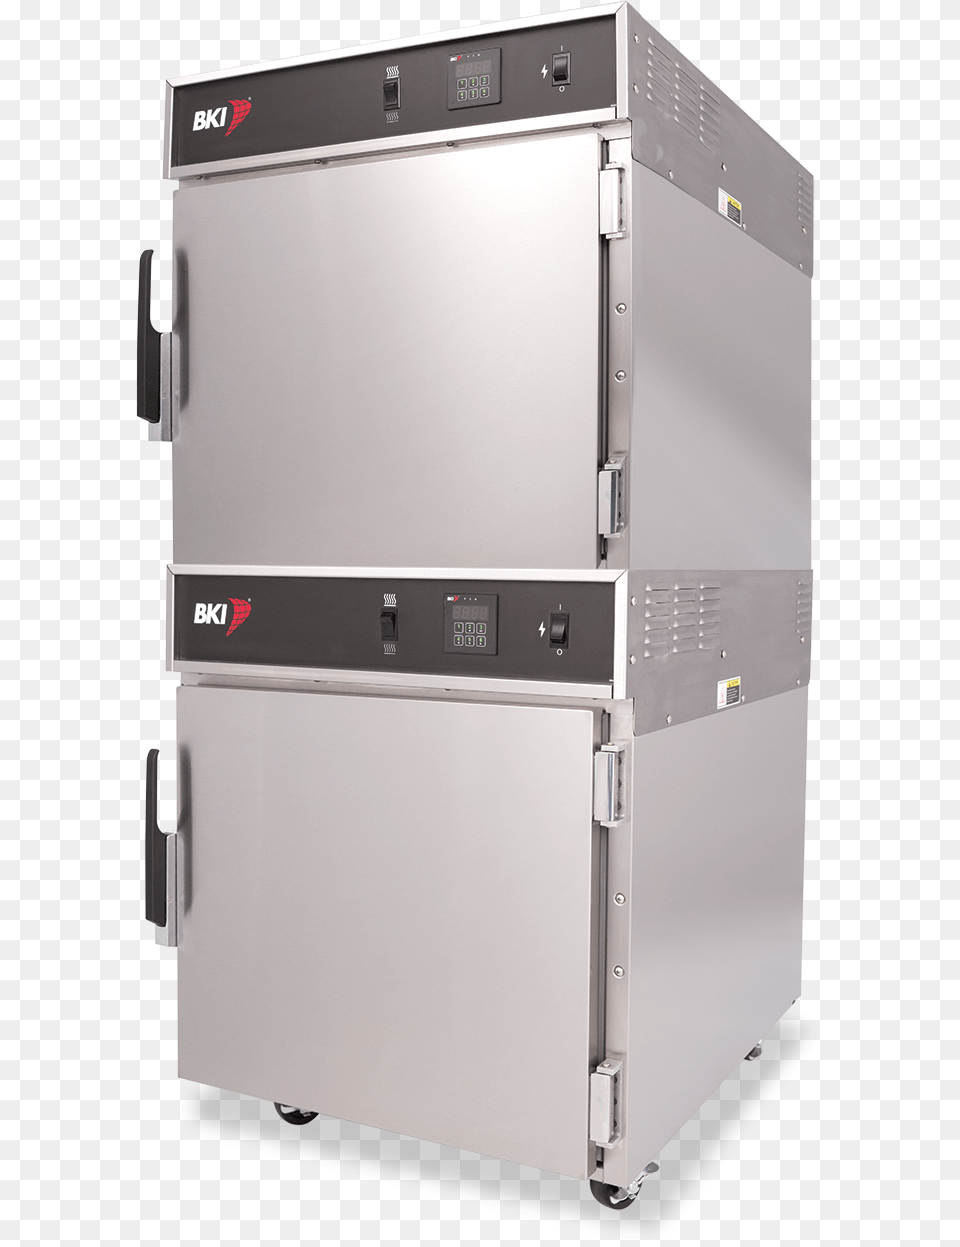 Go Series Of Convection Ovens Electric Generator, Appliance, Device, Electrical Device, Refrigerator Free Png